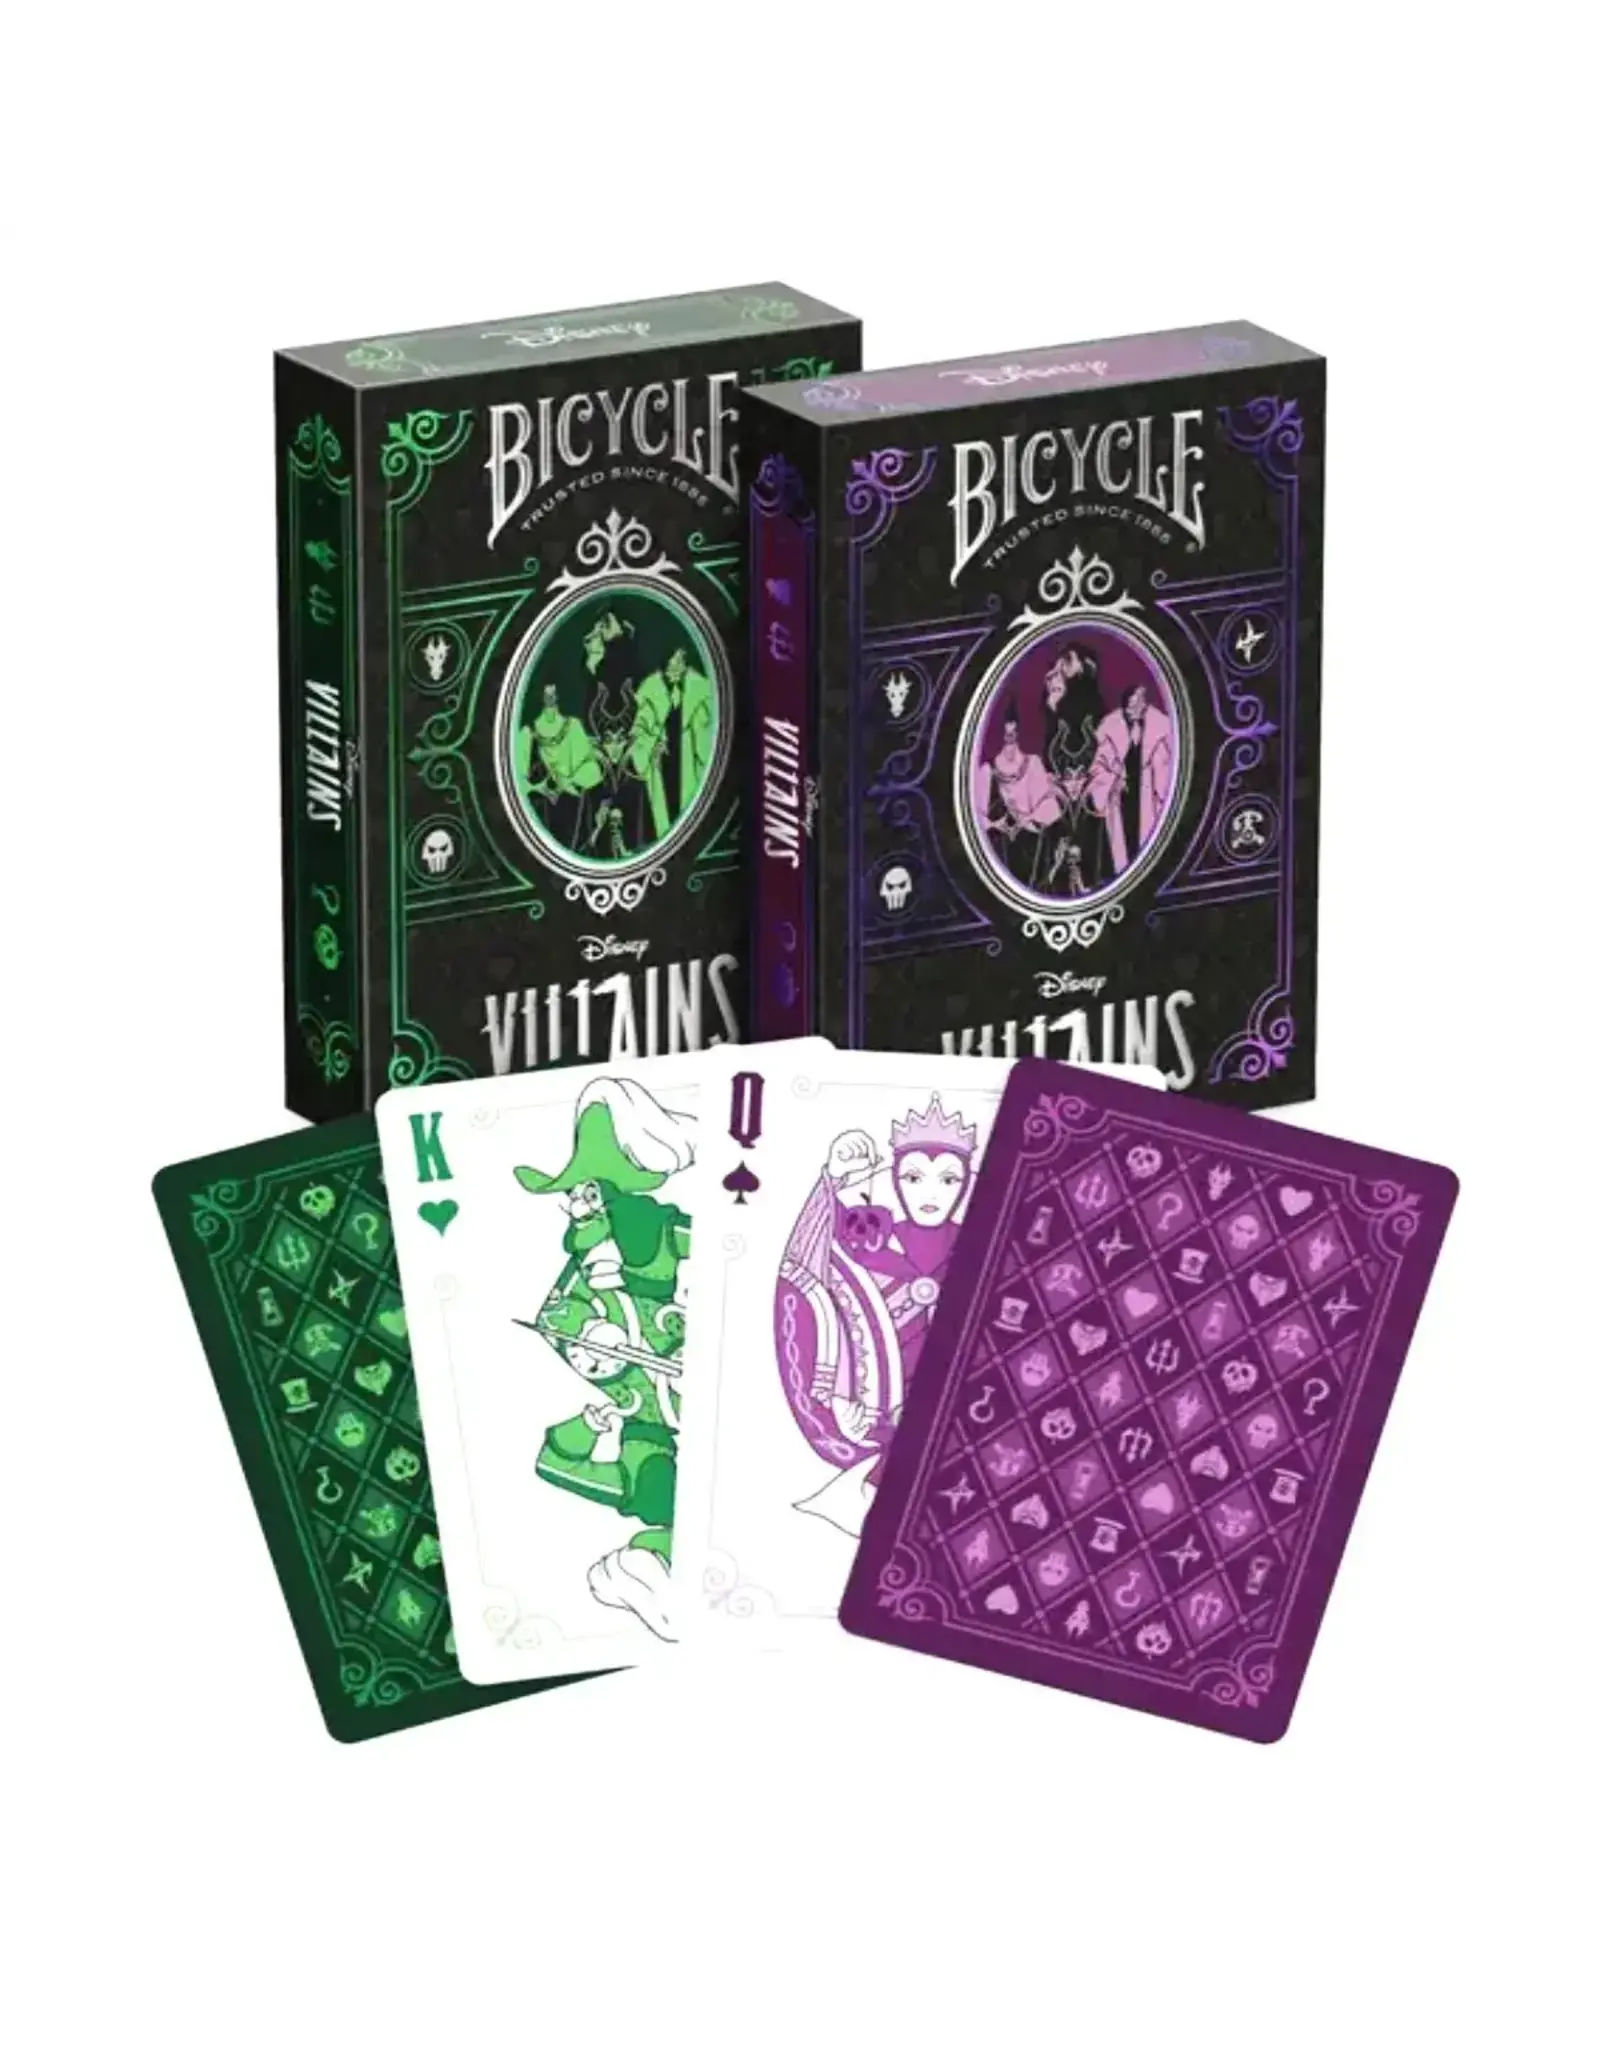 Bicycle Bicycle - Disney Villains Green/Purple Playing Cards Assorted